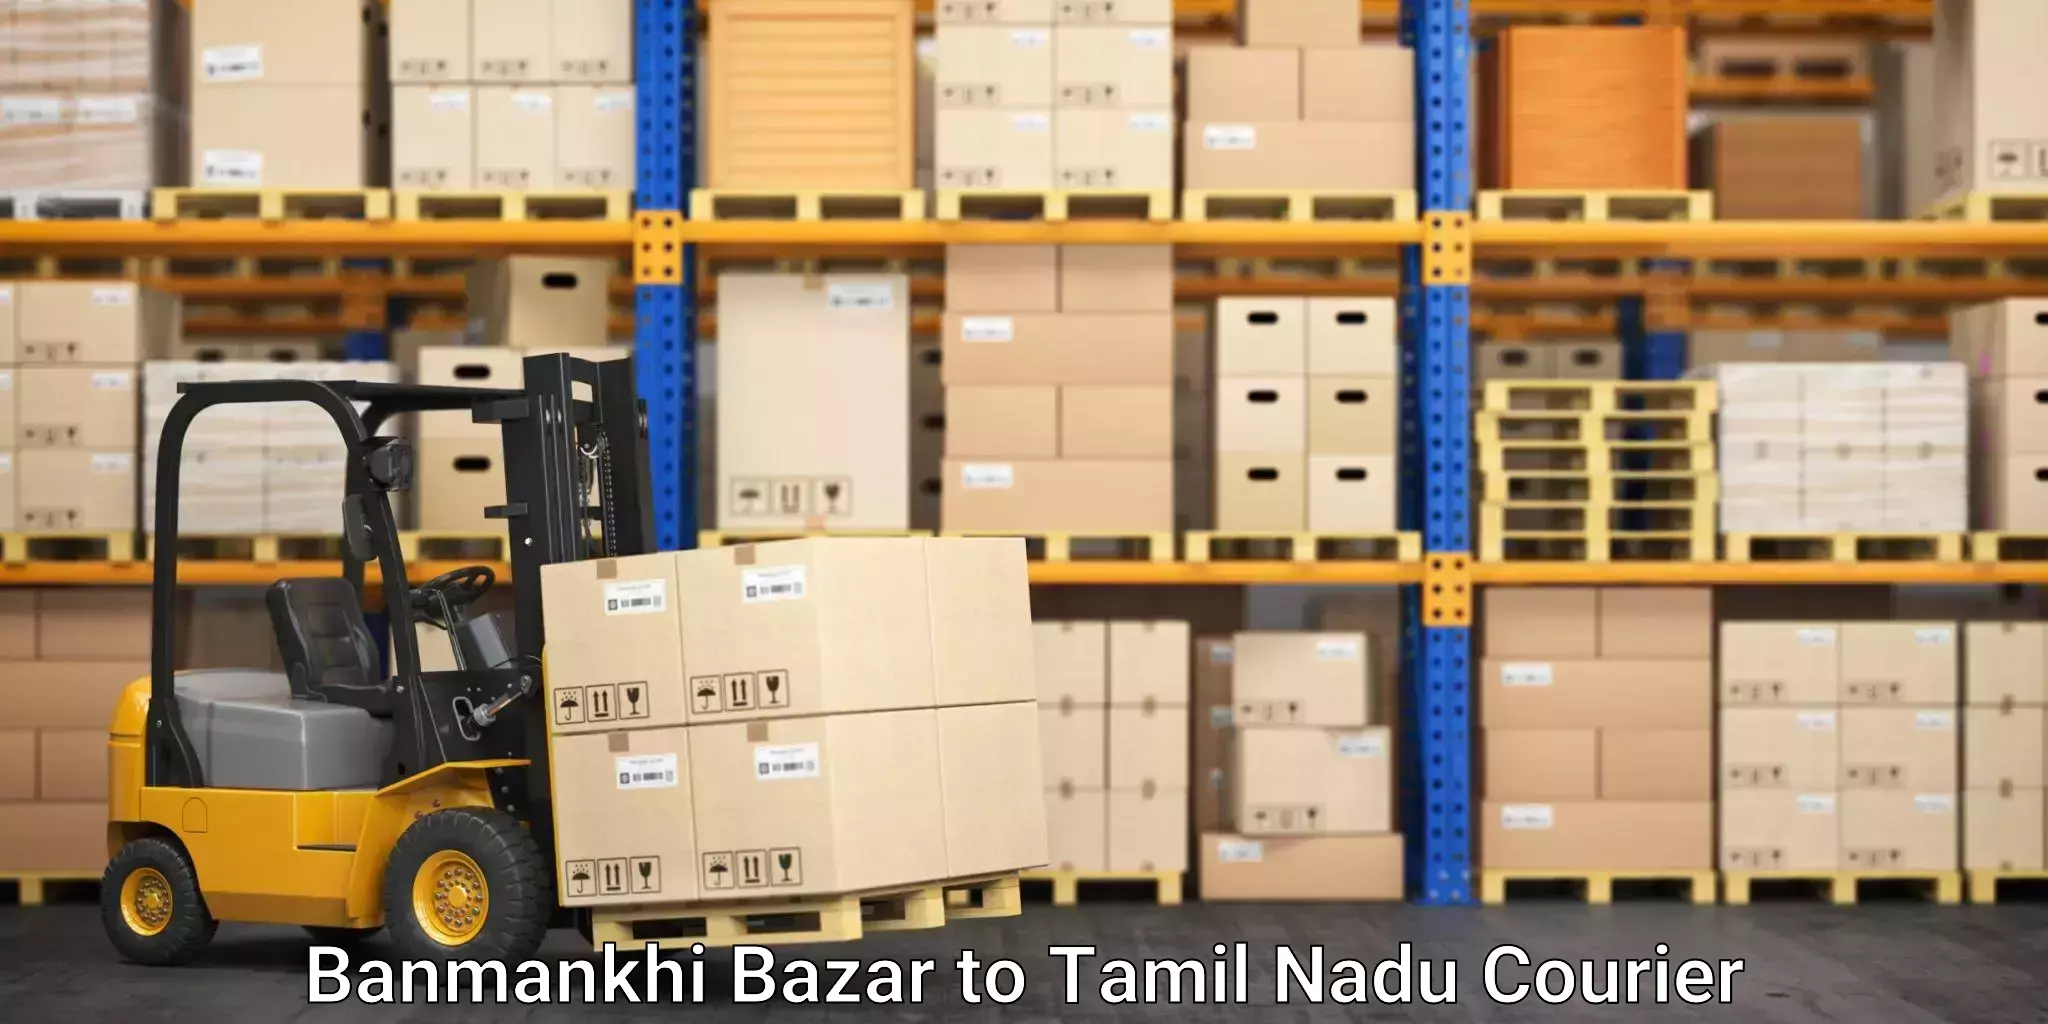 Efficient packing and moving Banmankhi Bazar to Ambattur